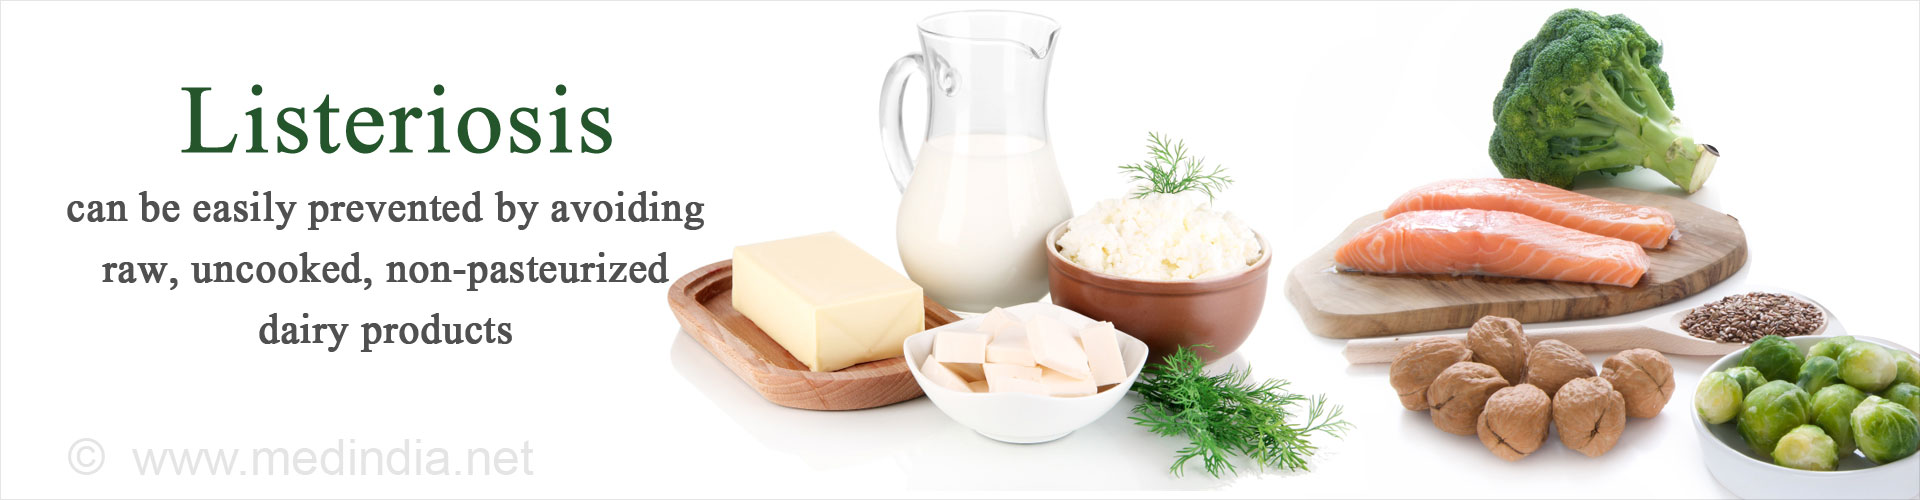 Listeriosis can be easily prevented by avoiding raw, uncooked, non pasteurized dairy products
